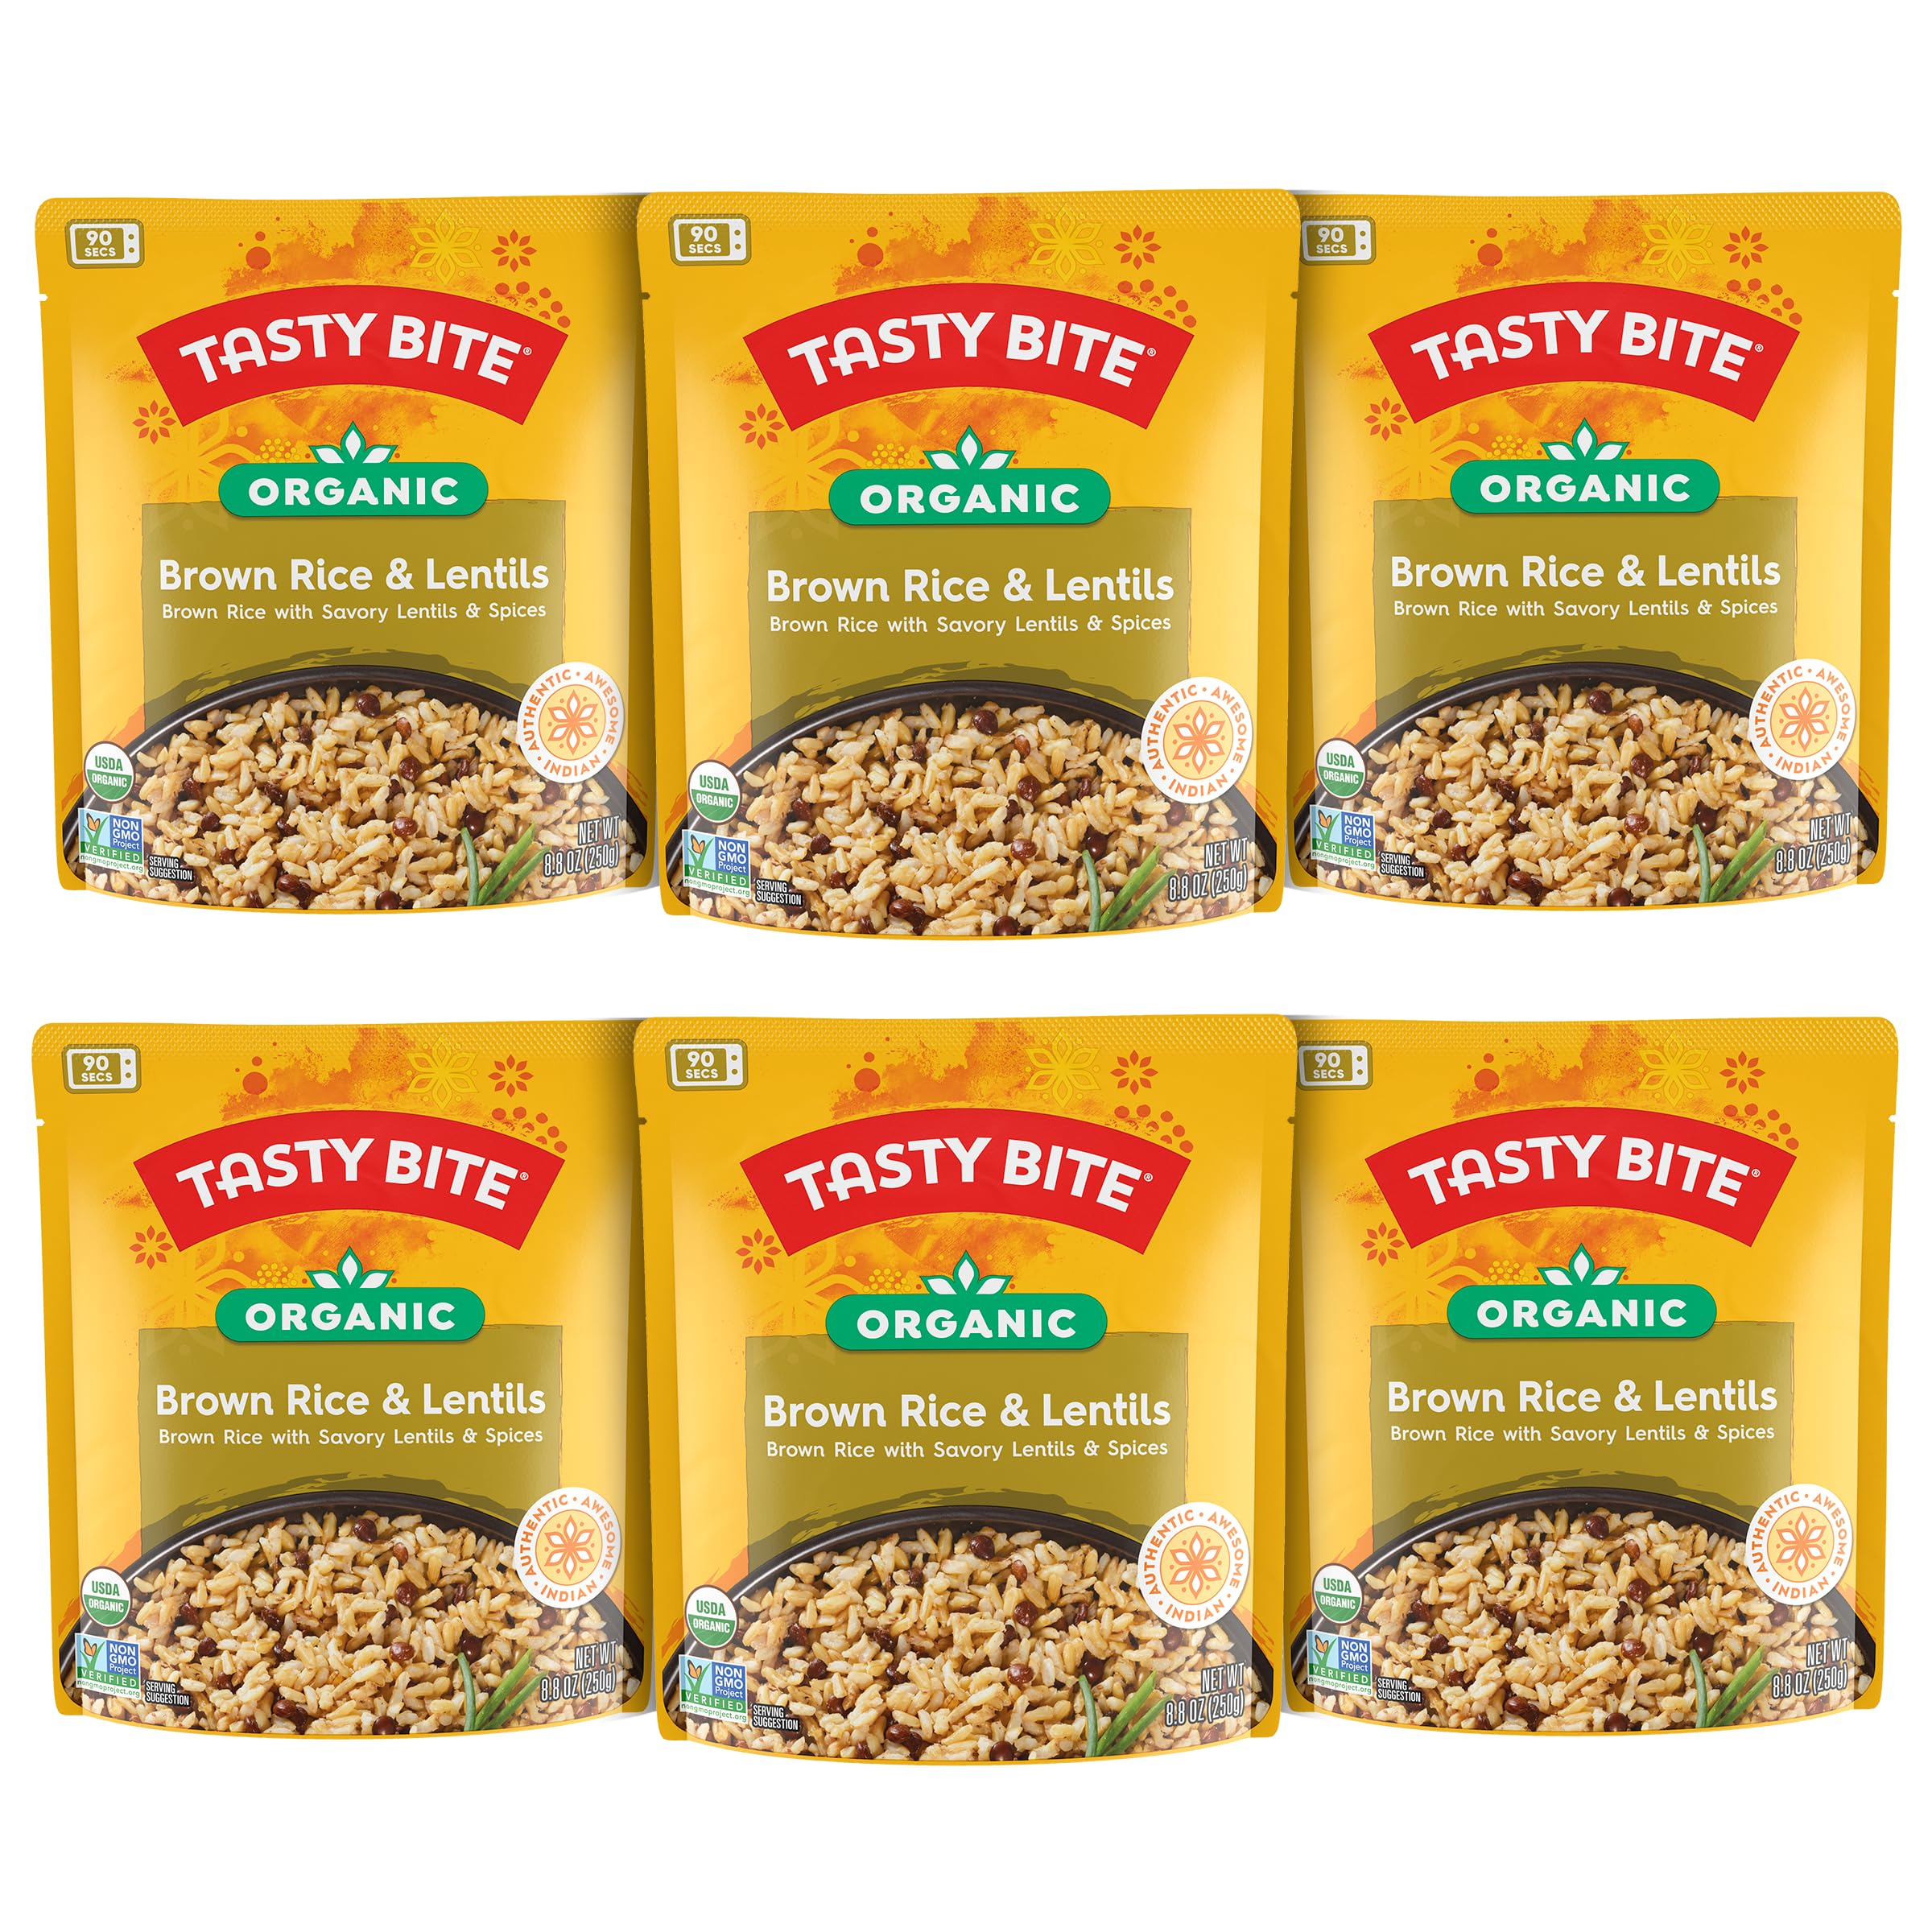 6-Pack 8.8-Oz Tasty Bite Organic Brown Rice & Lentils $13.14 w/ S&S + Free Shipping w/ Prime or on $35+